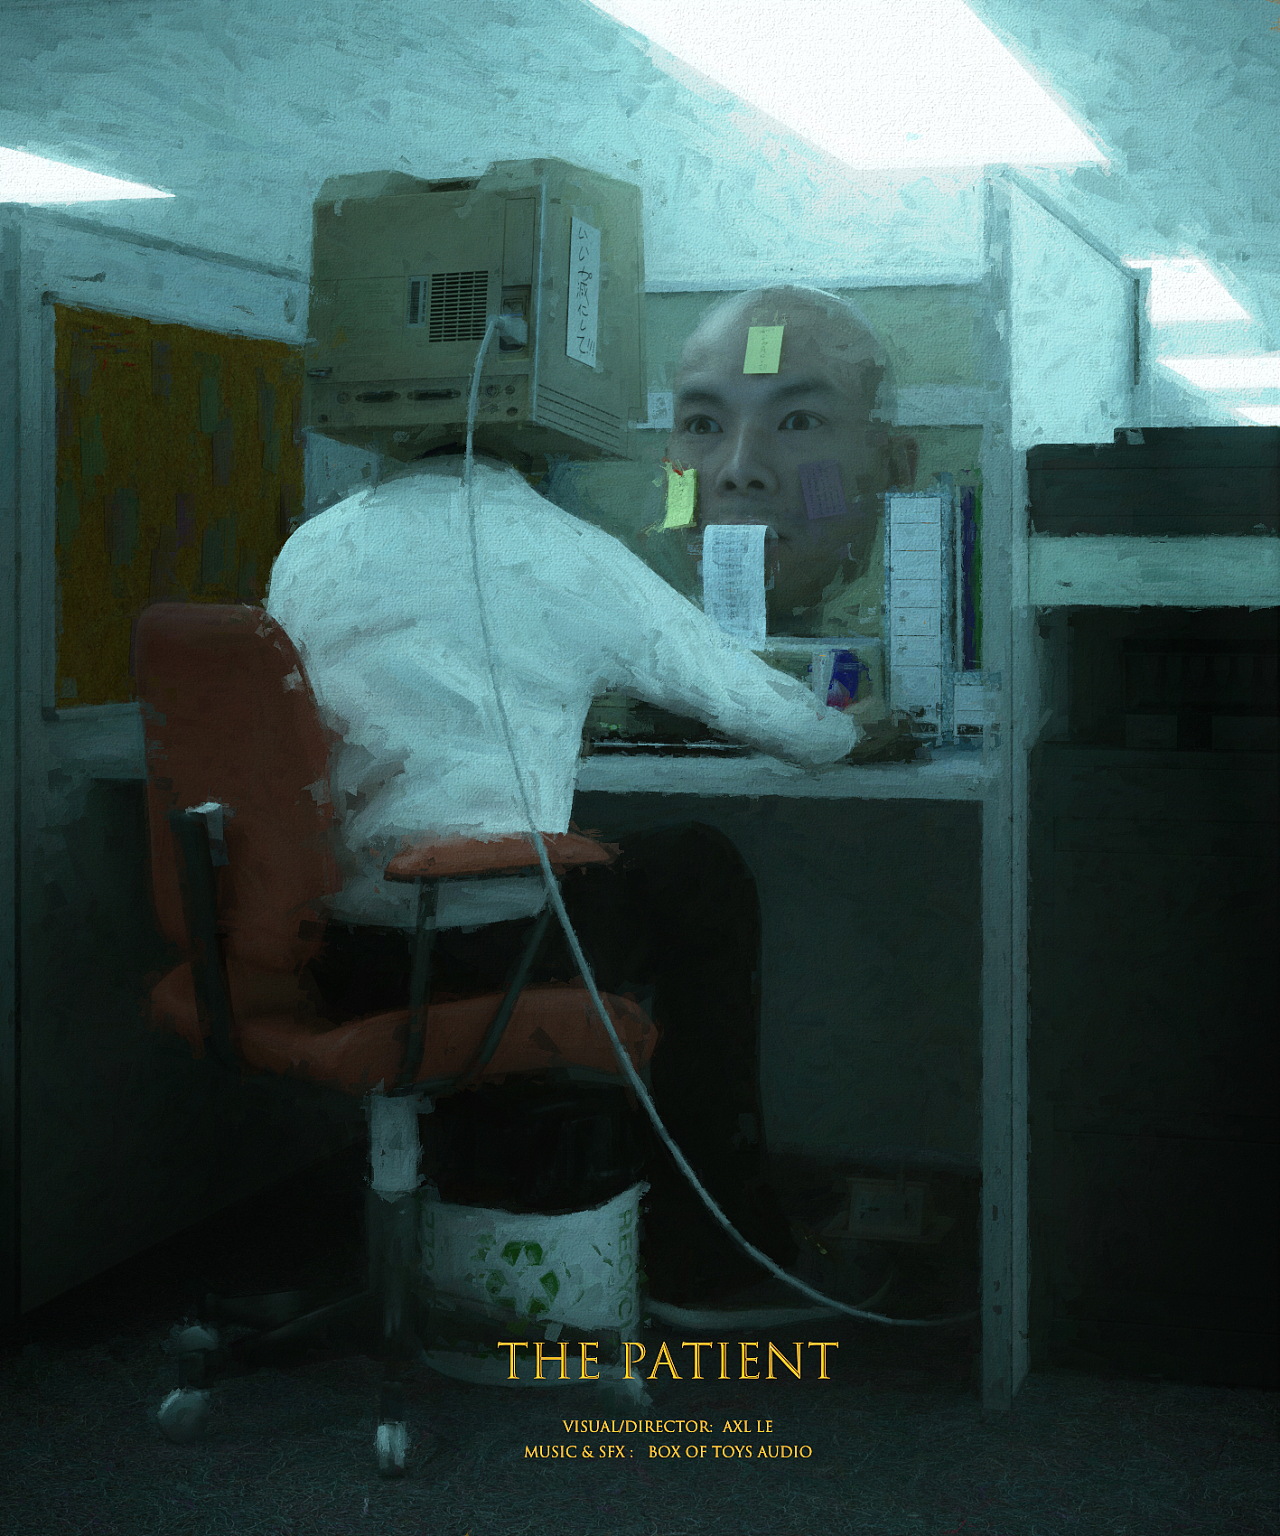 The Patient 病人